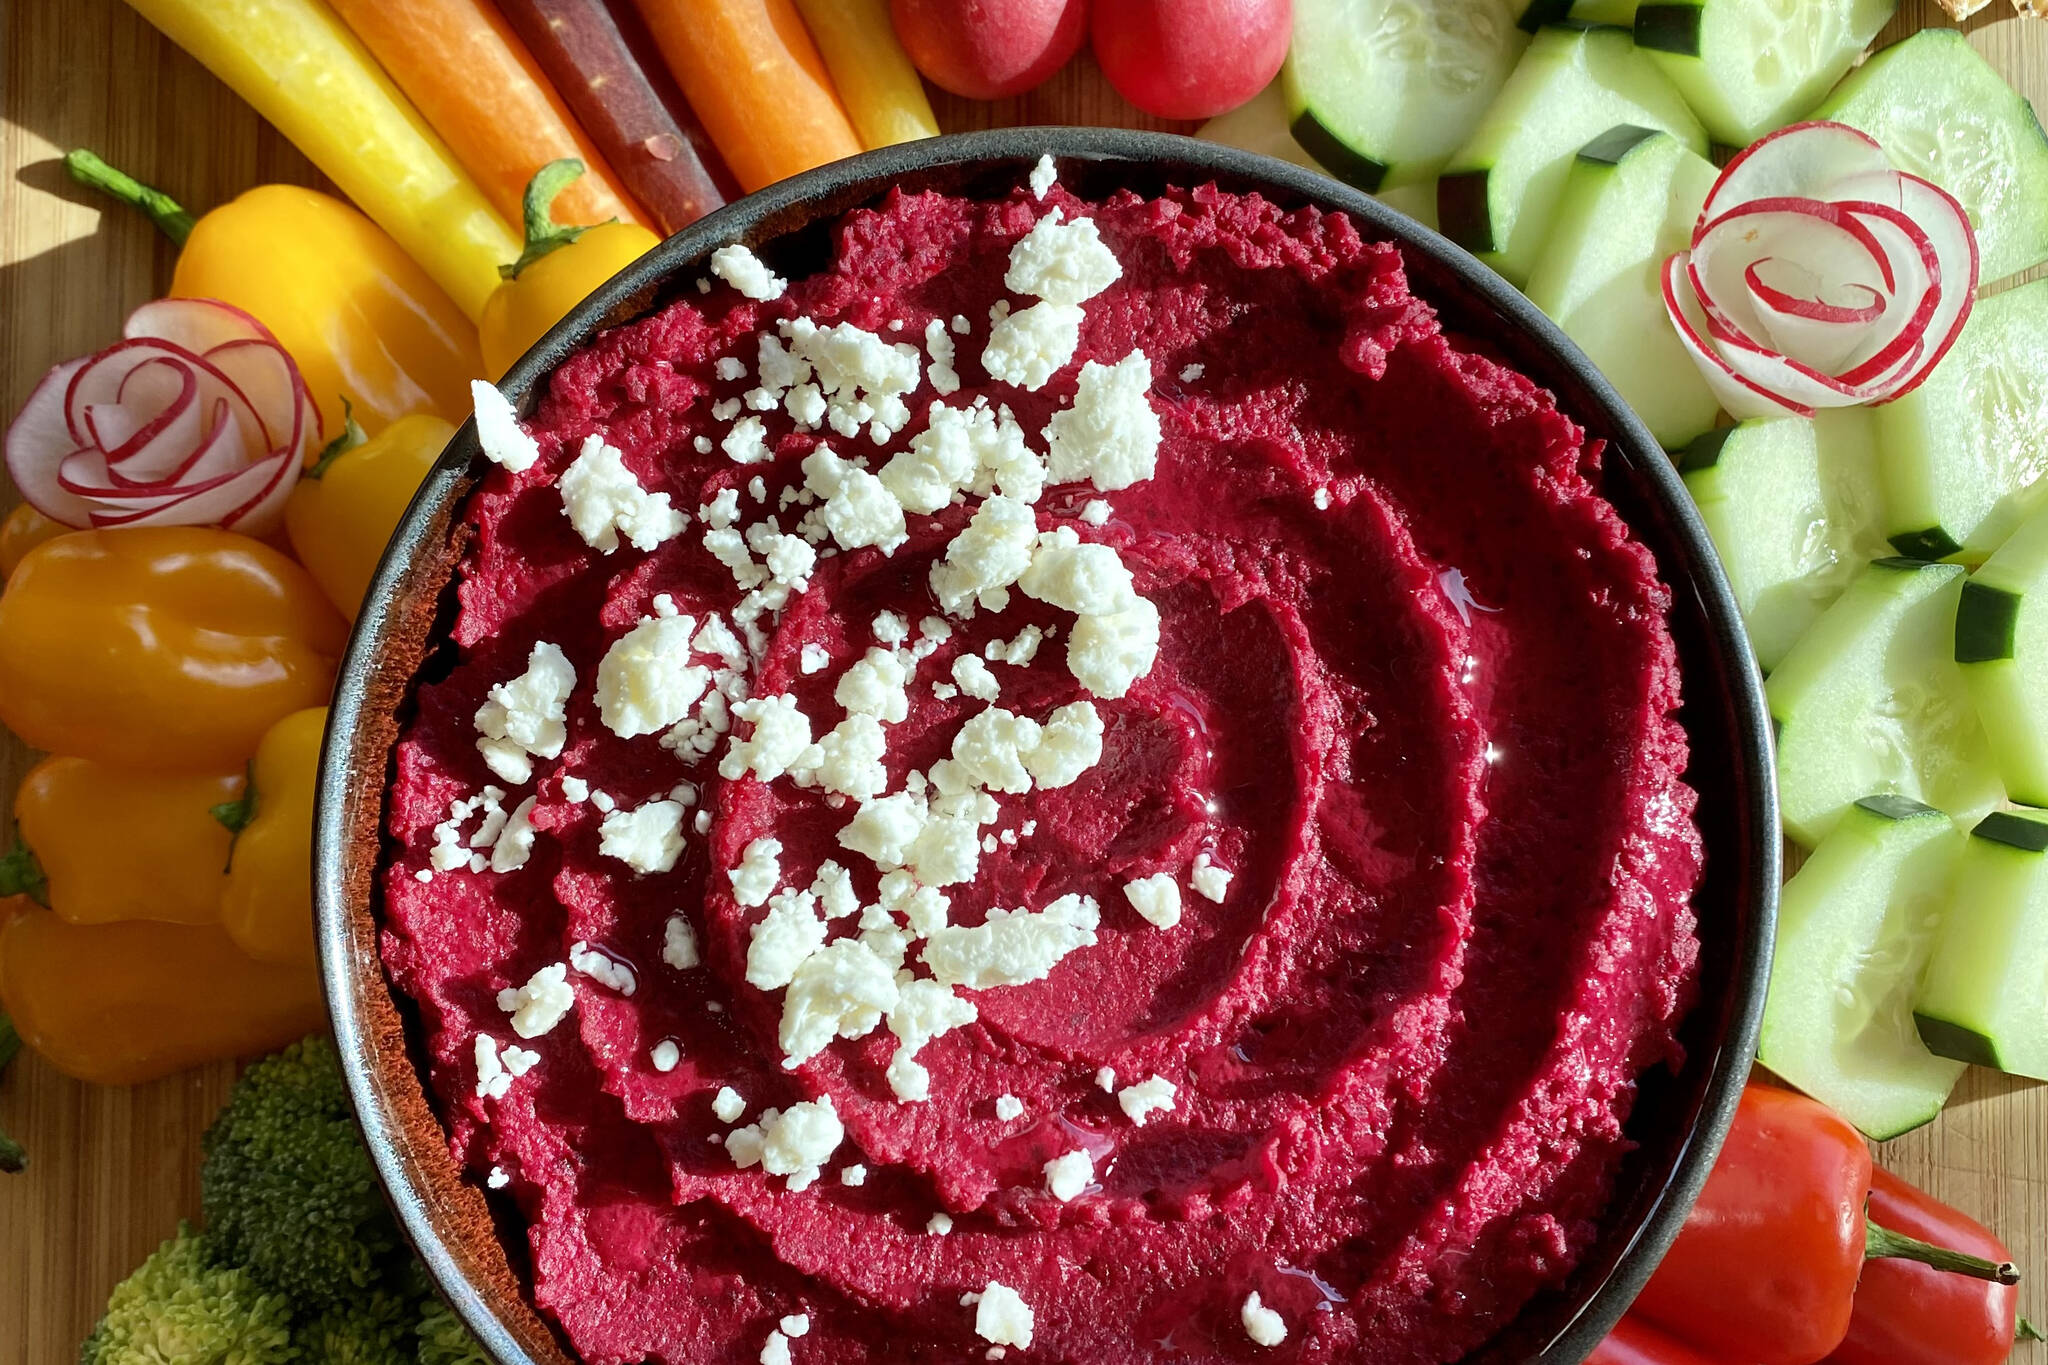 Garbanzo beans and beets are topped with feta to provide a colorful dip for springtime crudité. (Photo by Tressa Dale/Peninsula Clarion)